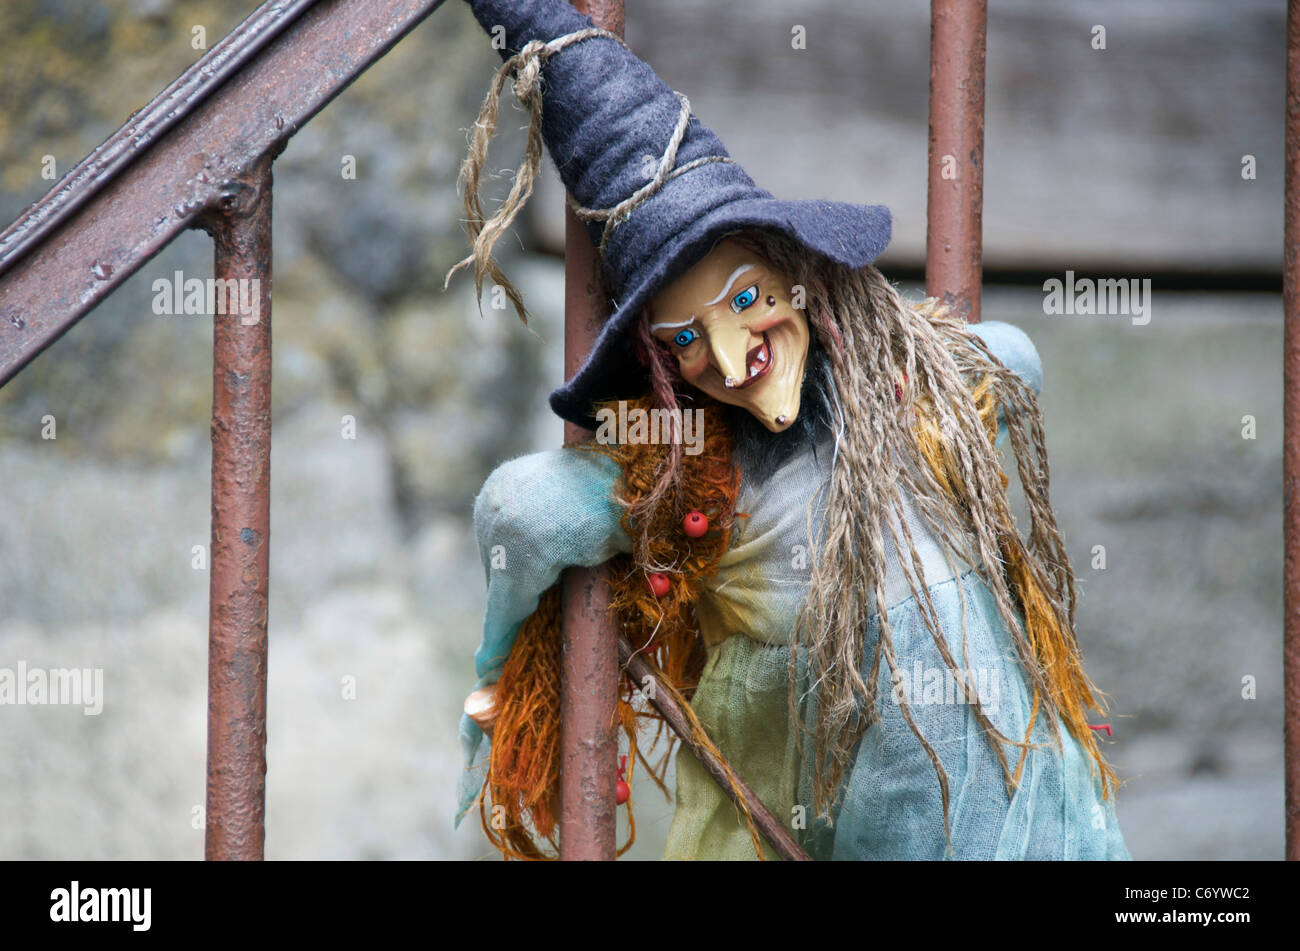 Witch puppet. Stock Photo